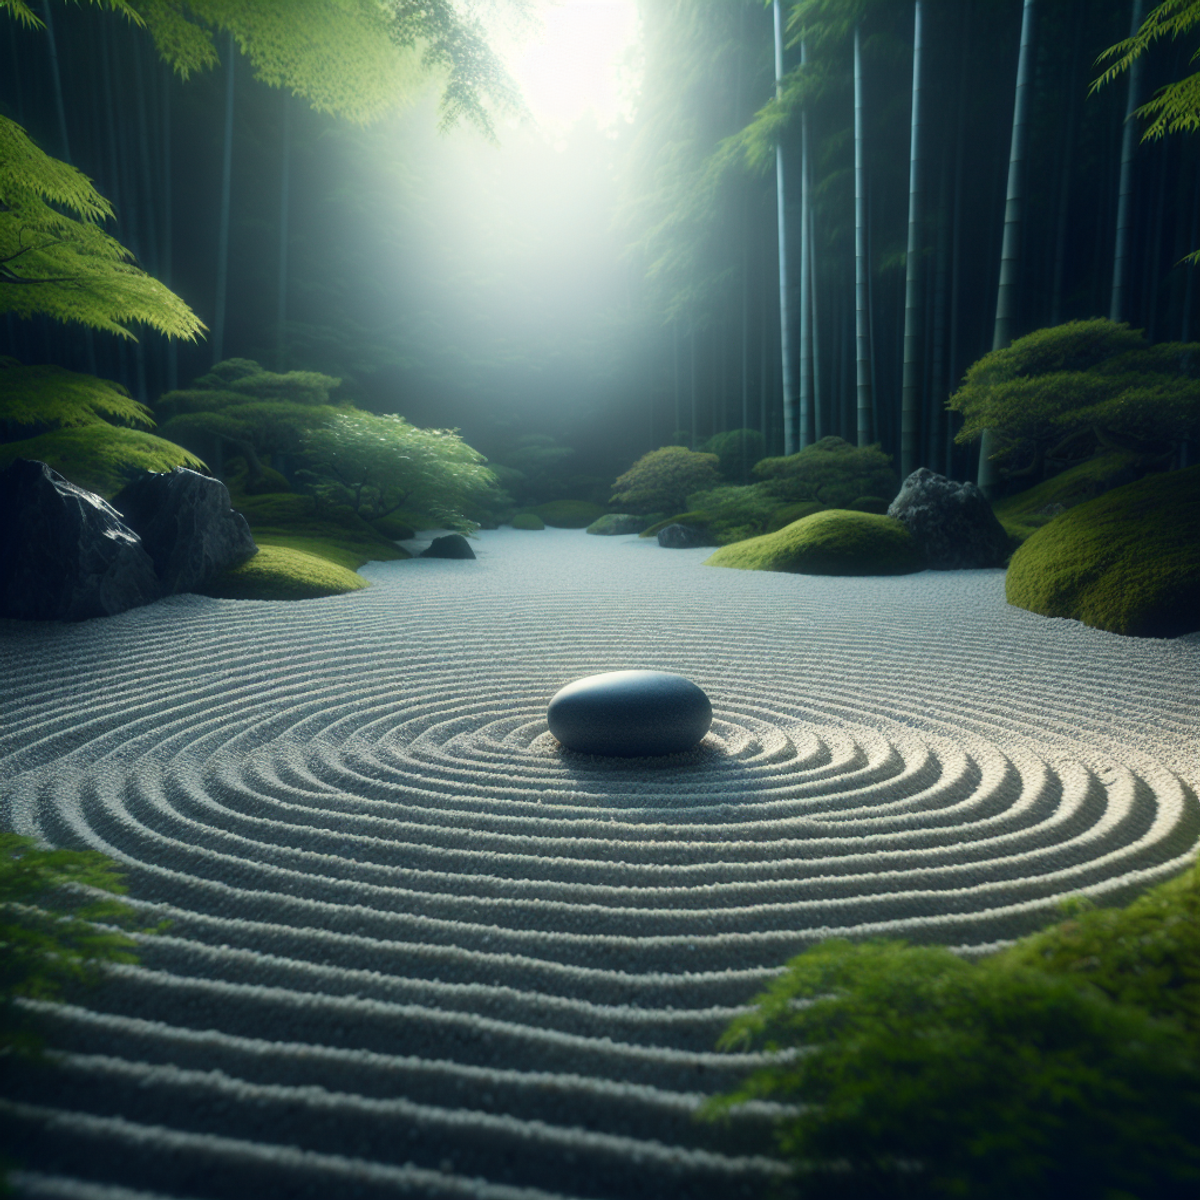 A serene Zen garden with a single pebble at its center, surrounded by raked sand patterns and minimalistic vegetation.